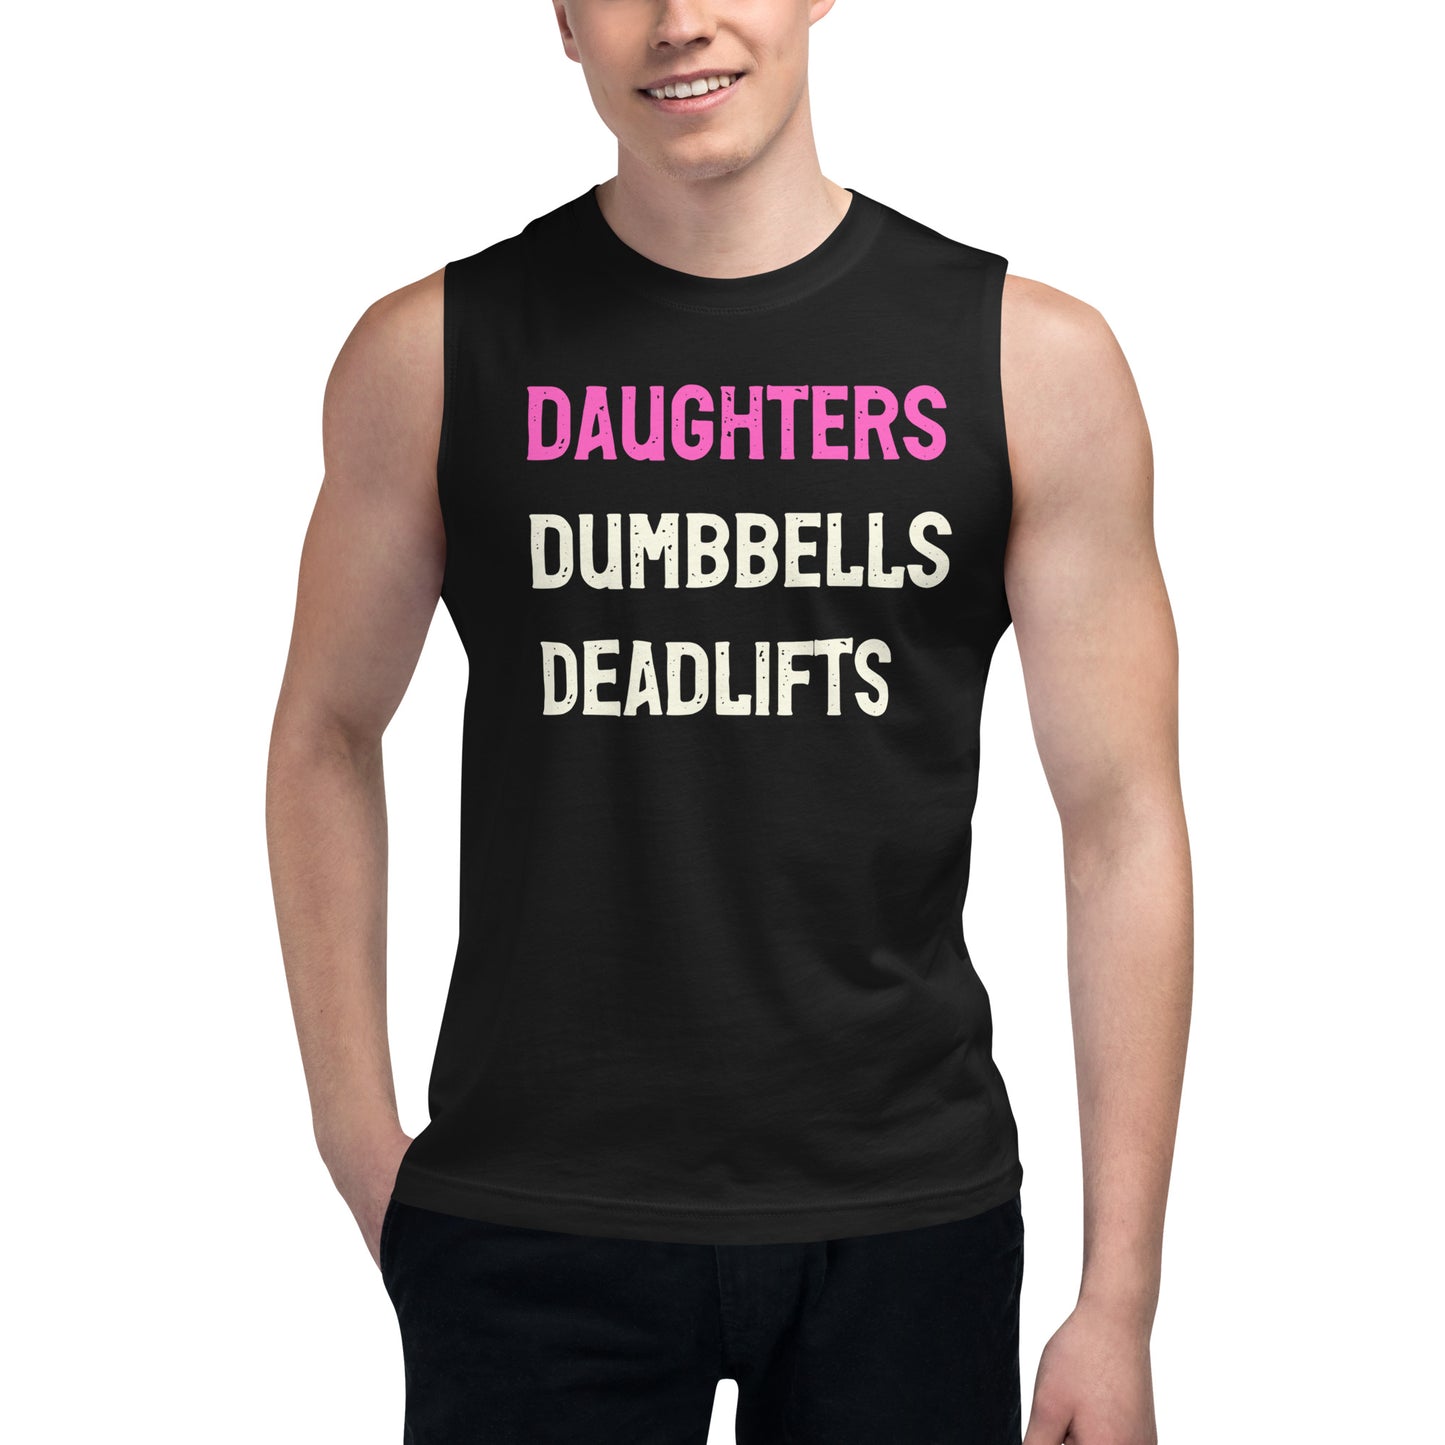 Daughters, Dumbbells, and Deadlifts